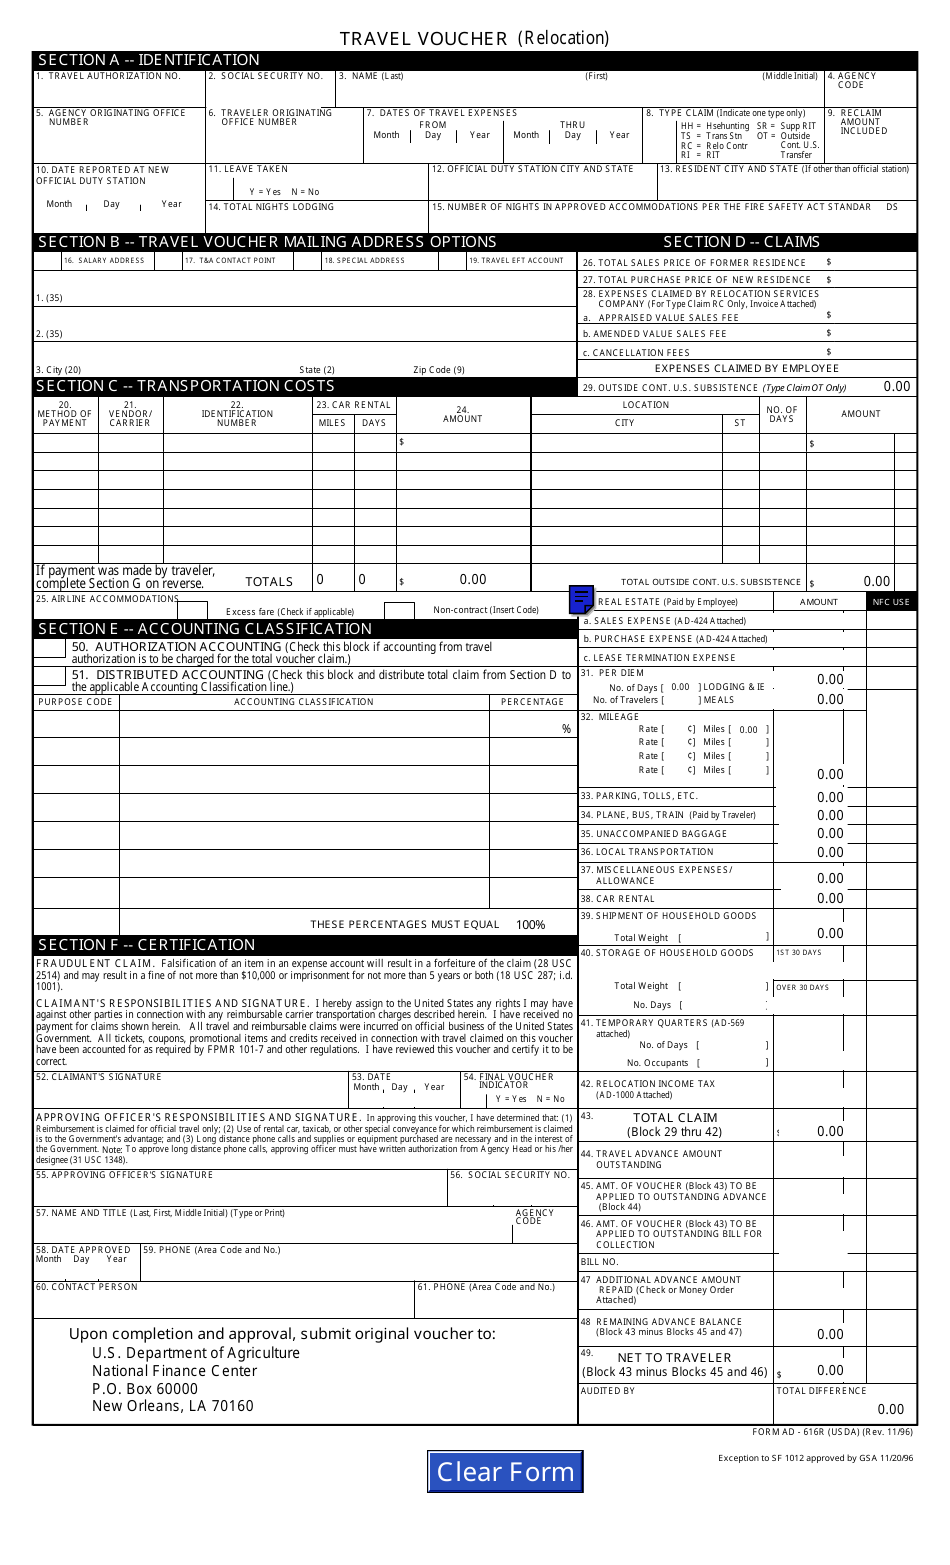 Form AD-616R Travel Voucher (Relocation), Page 1